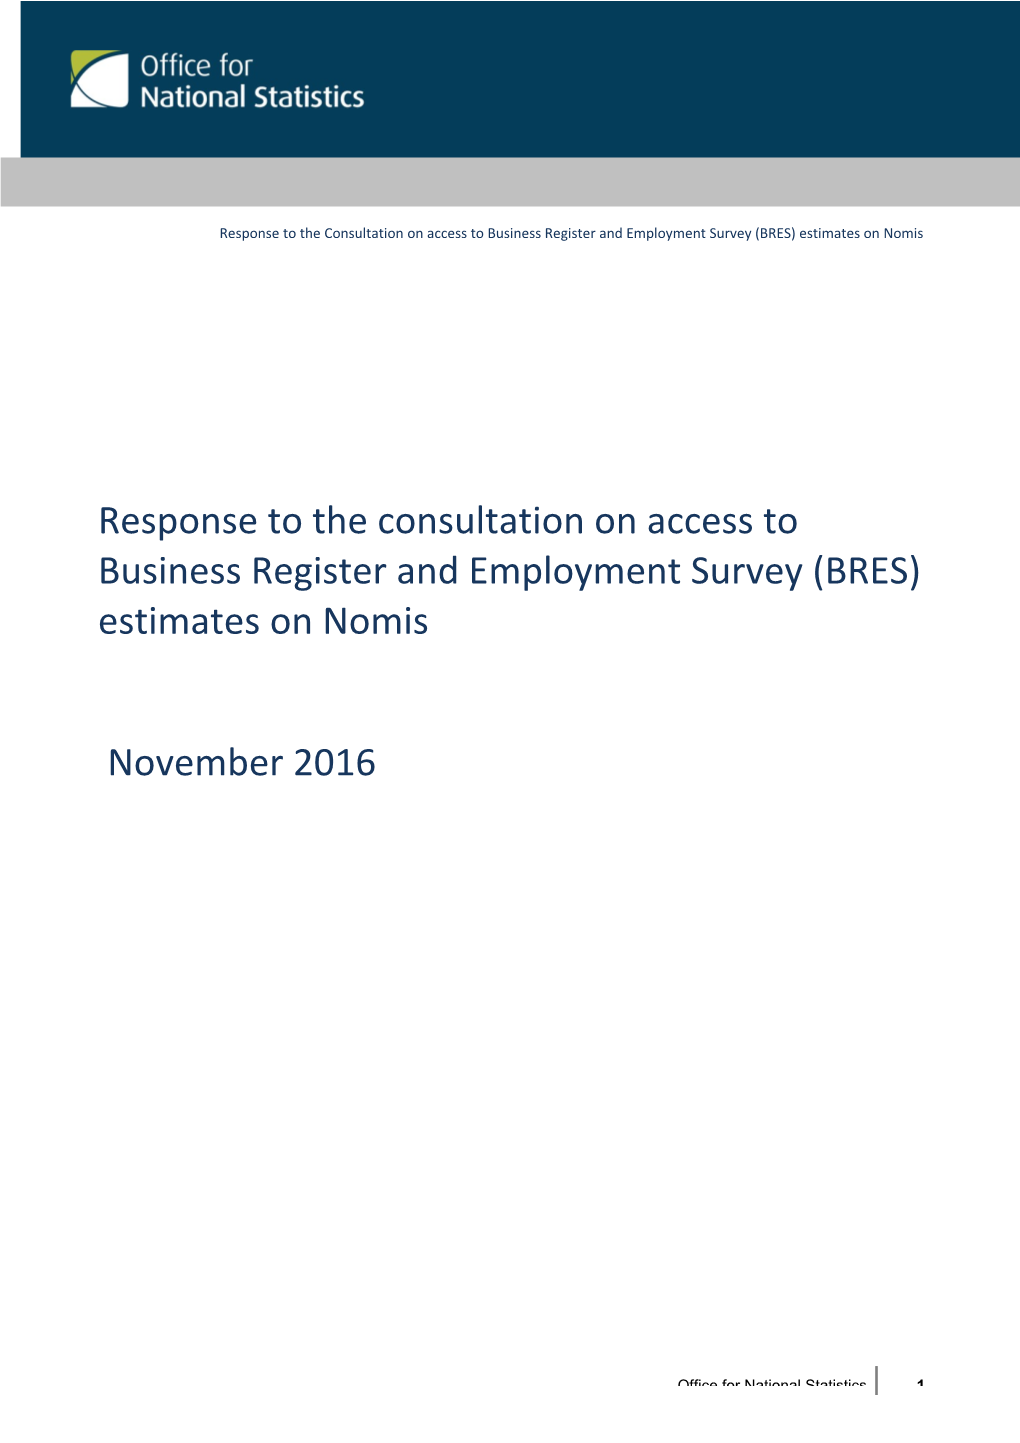 Response to the Consultation on Access to Business Register and Employment Survey (BRES)